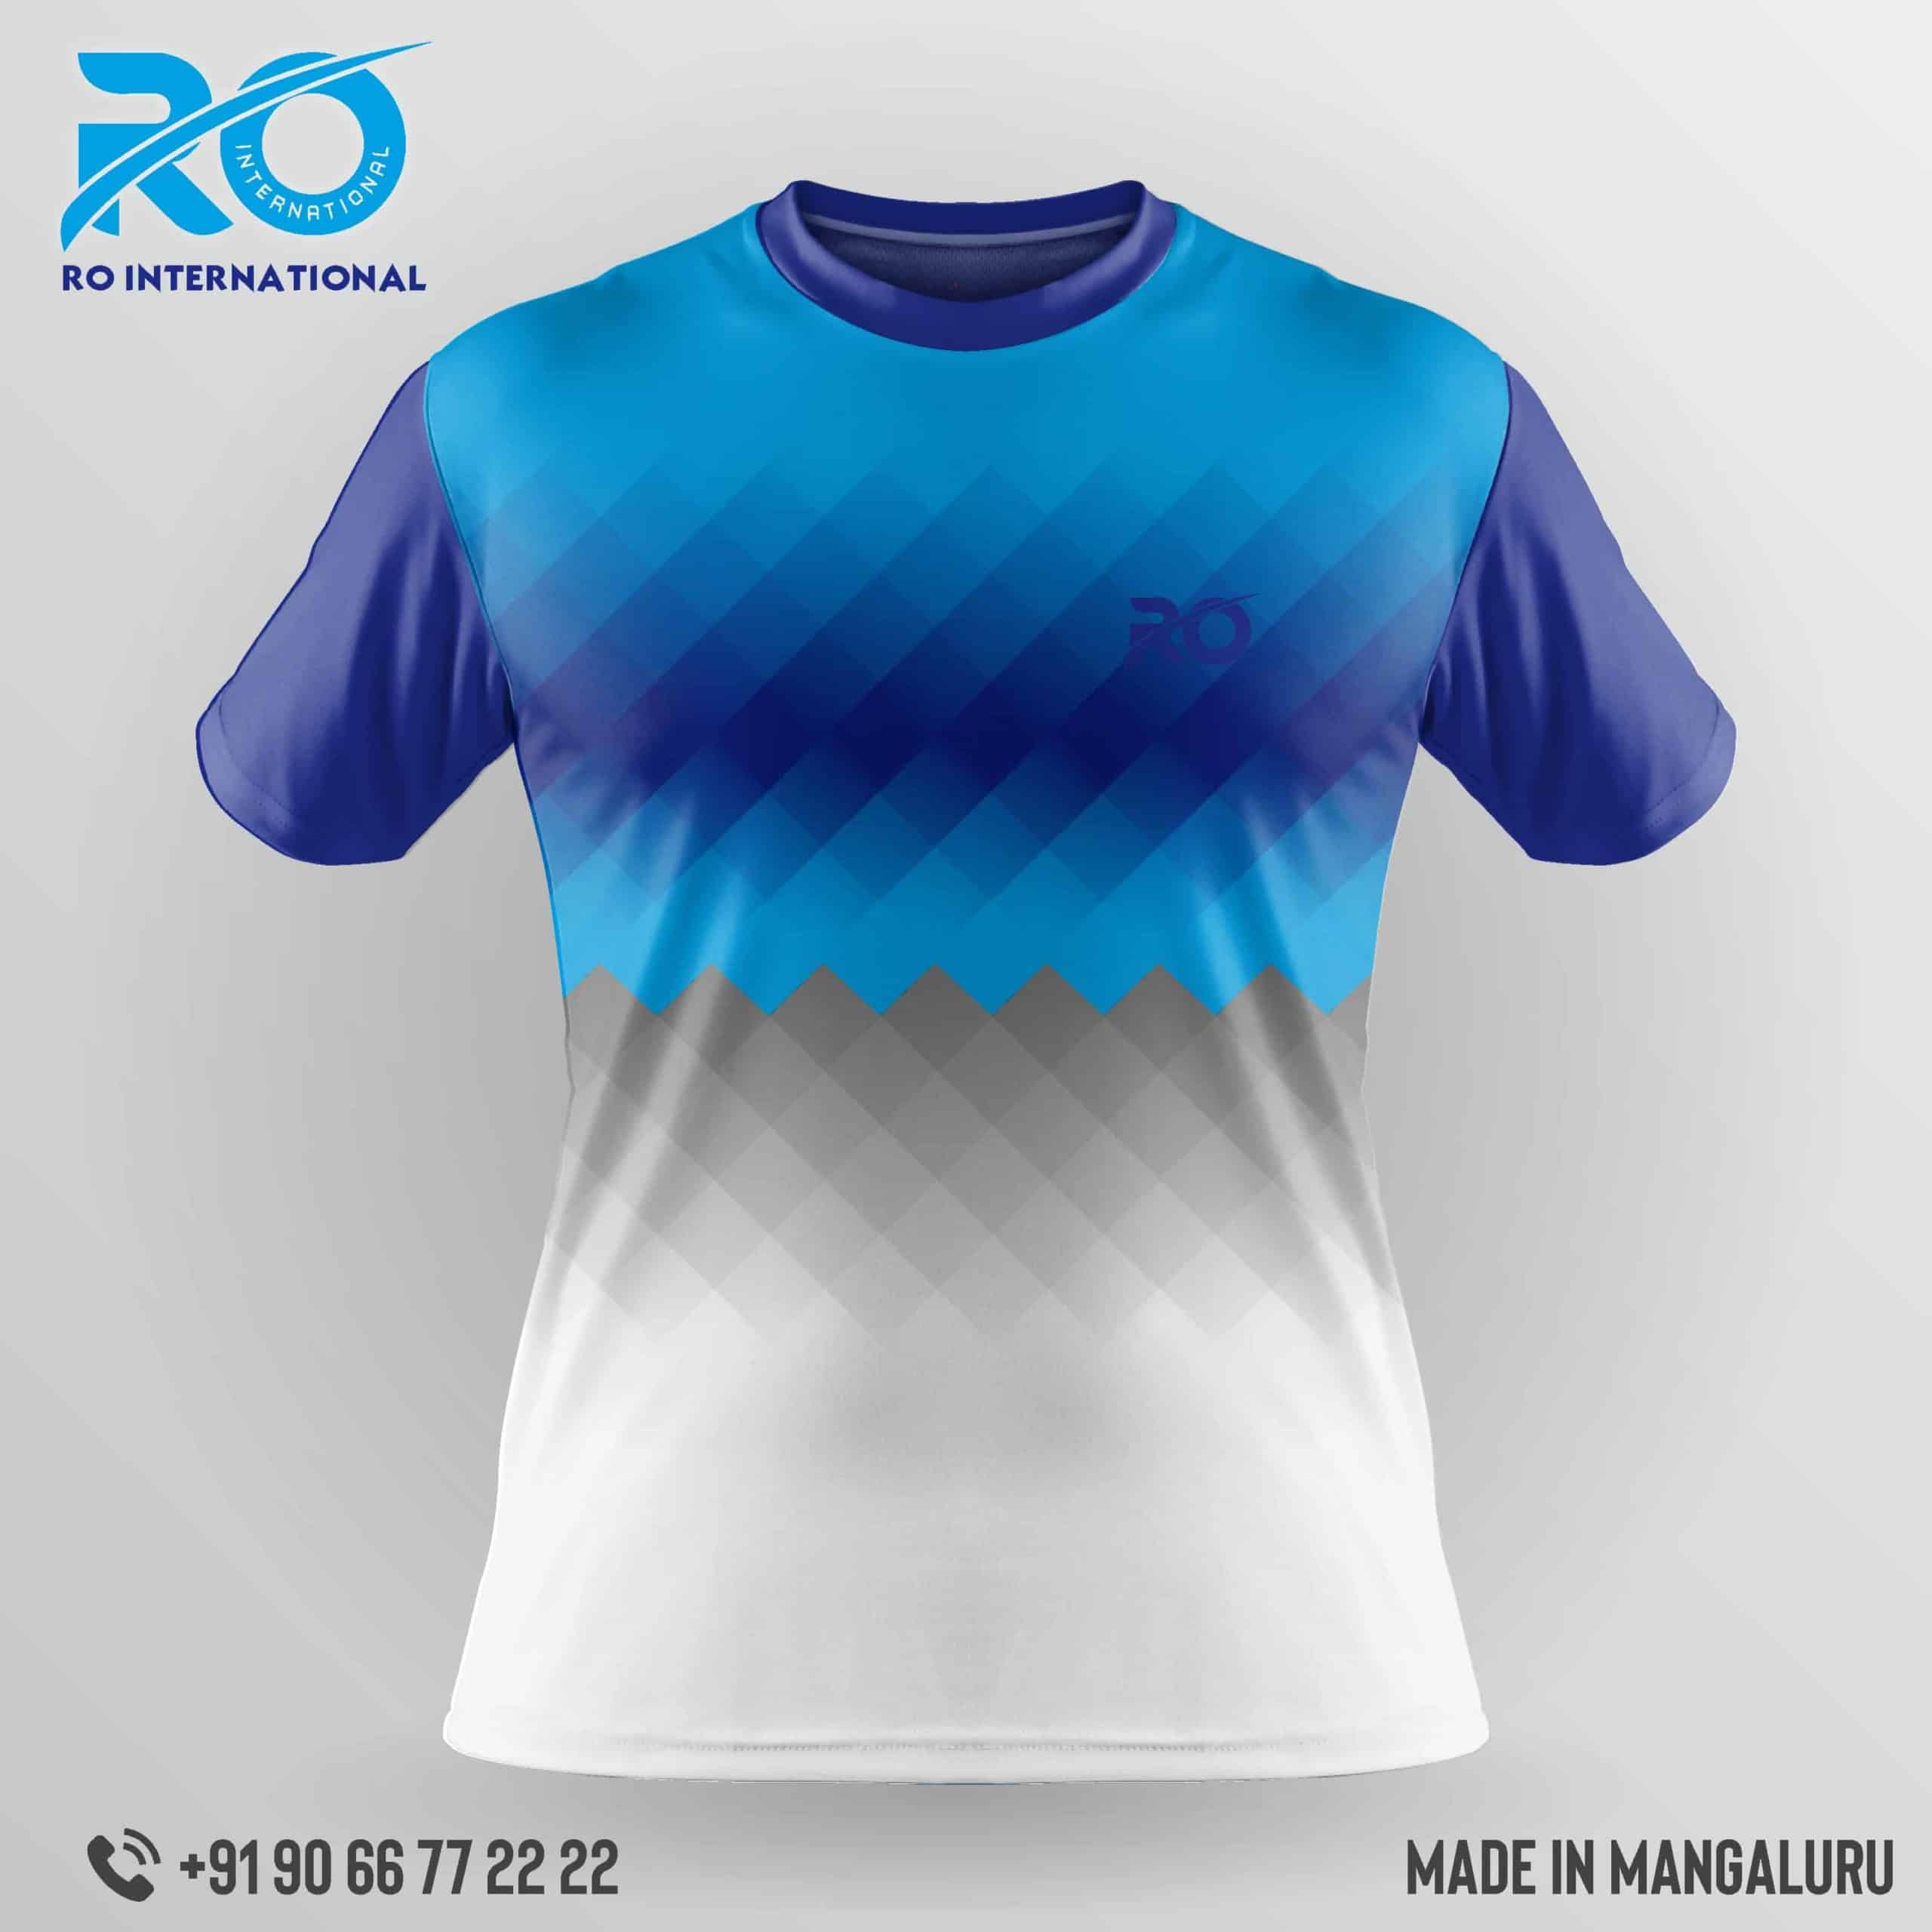 Roxy Ash Rose Mkm0 Tops in Mangalore - Dealers, Manufacturers